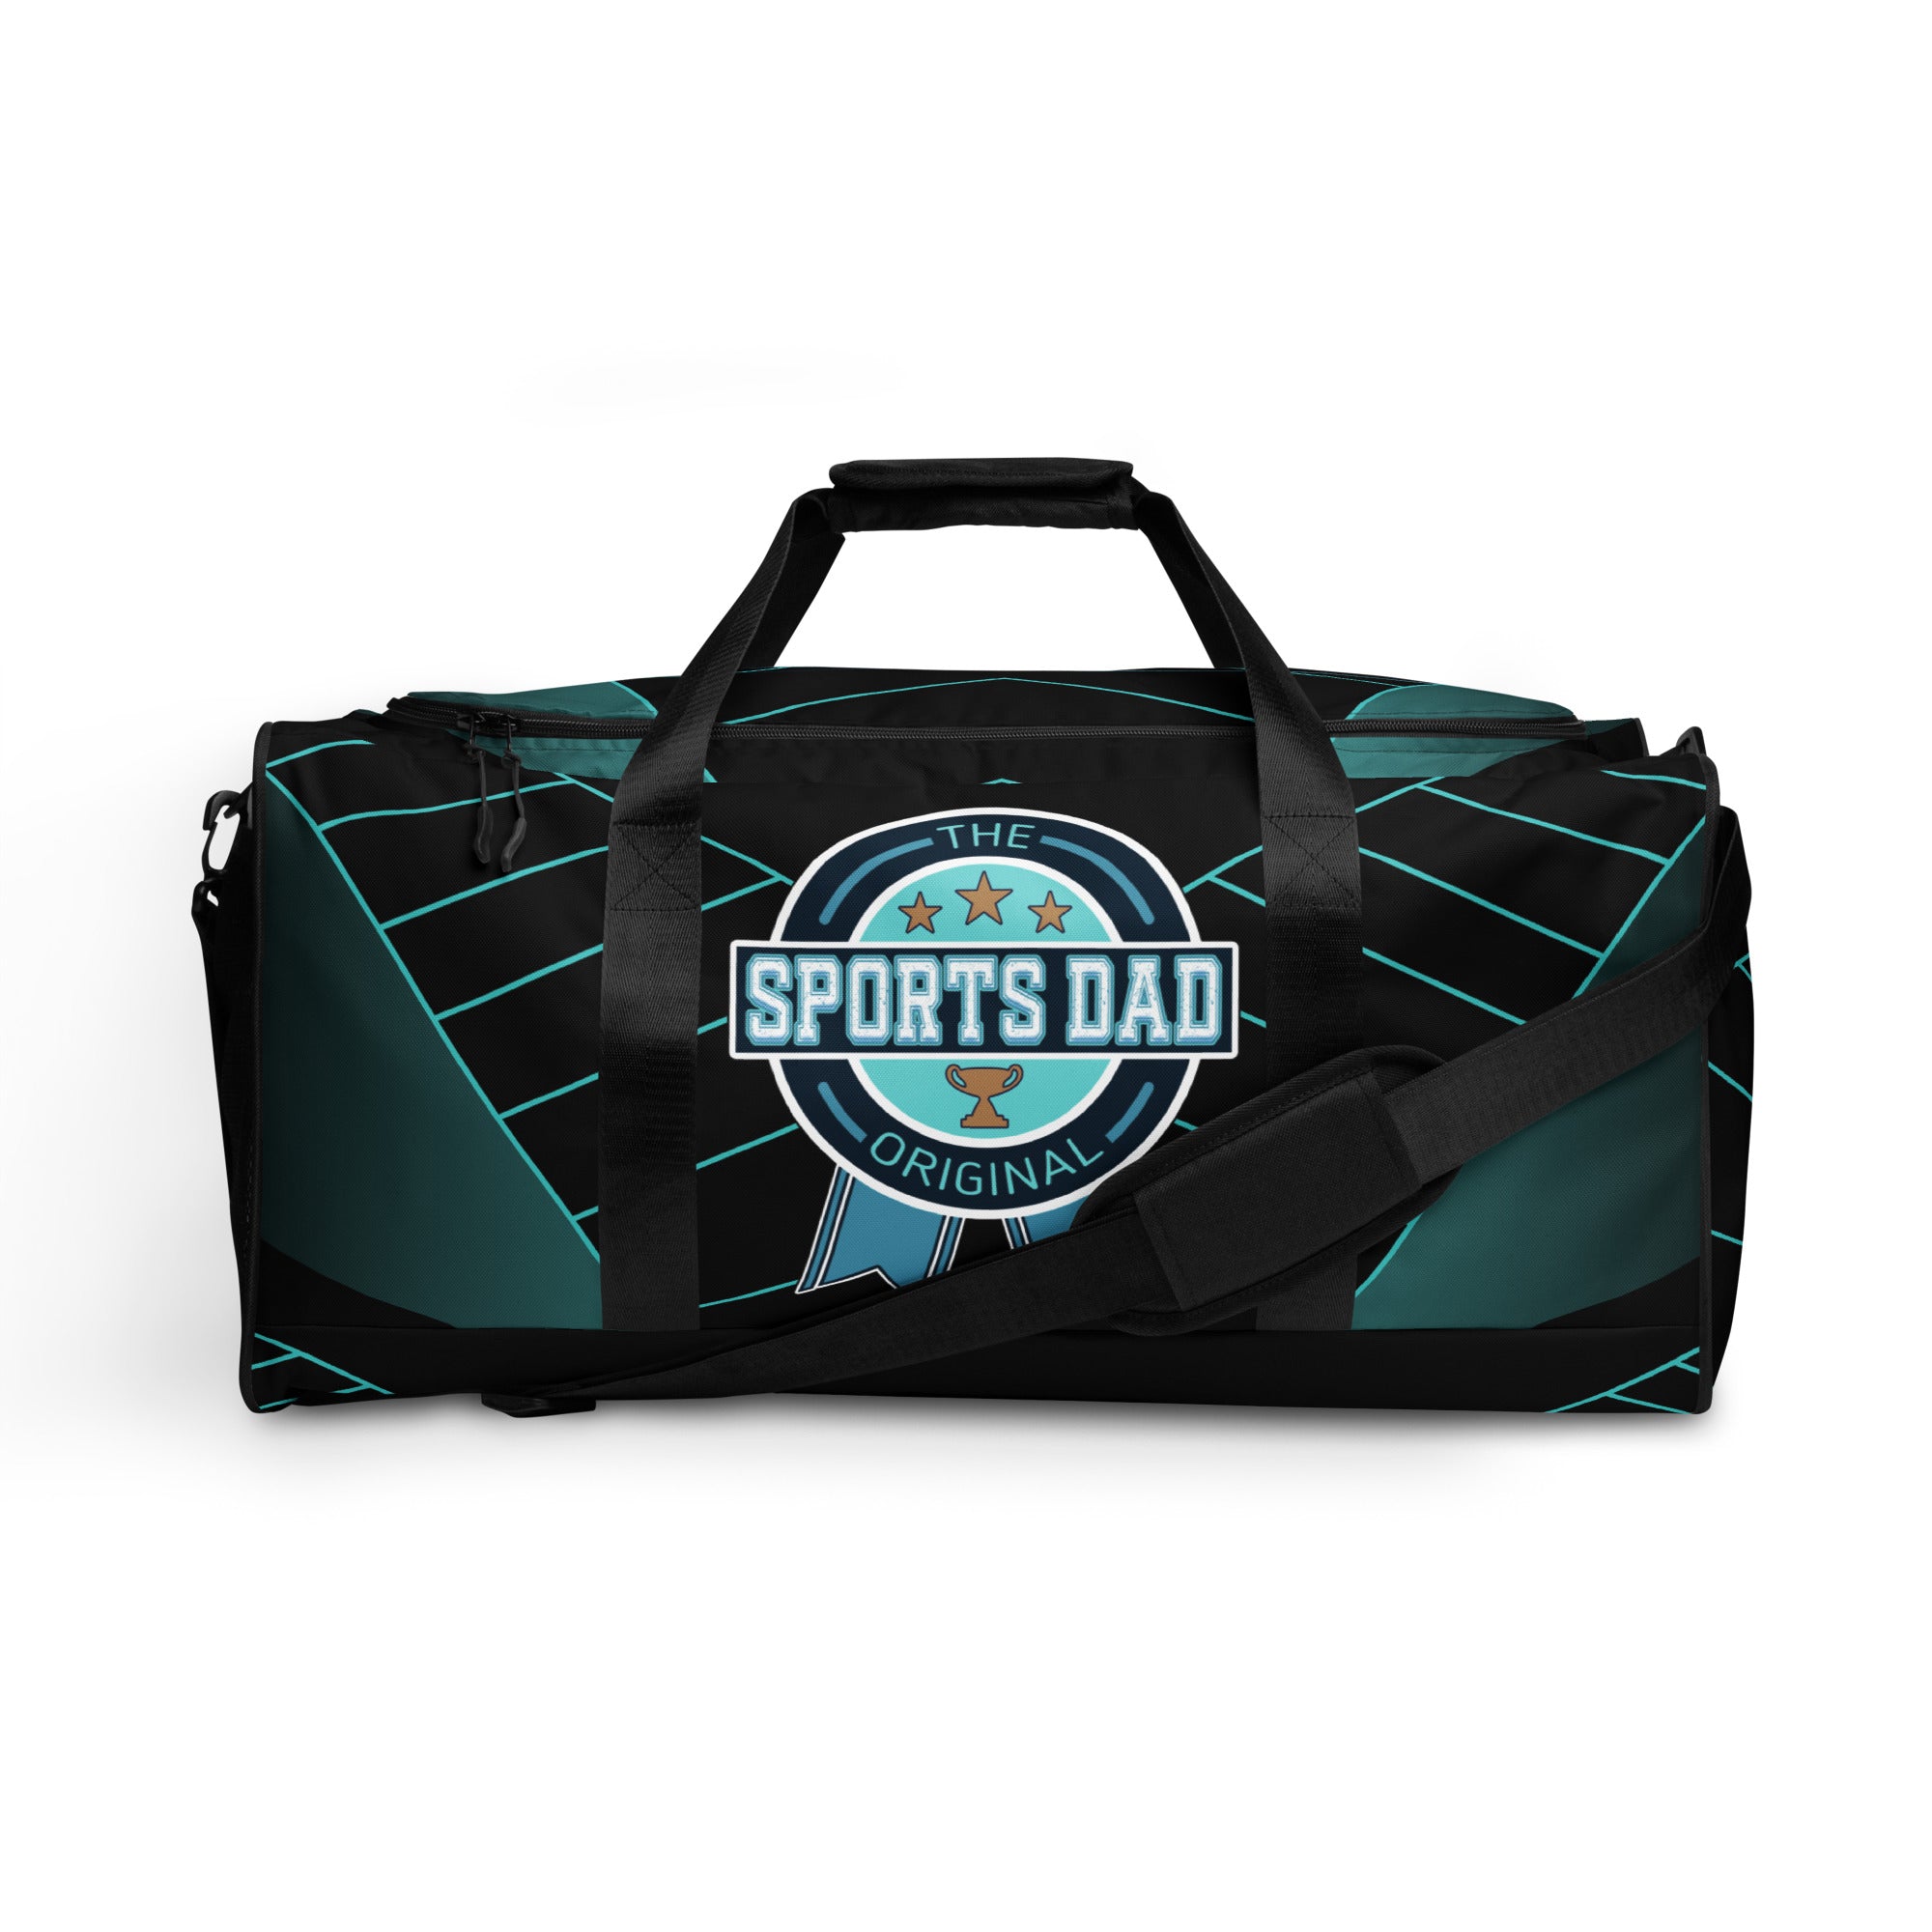 Sports Dad Ultimate Duffle Bag - Teal Stare